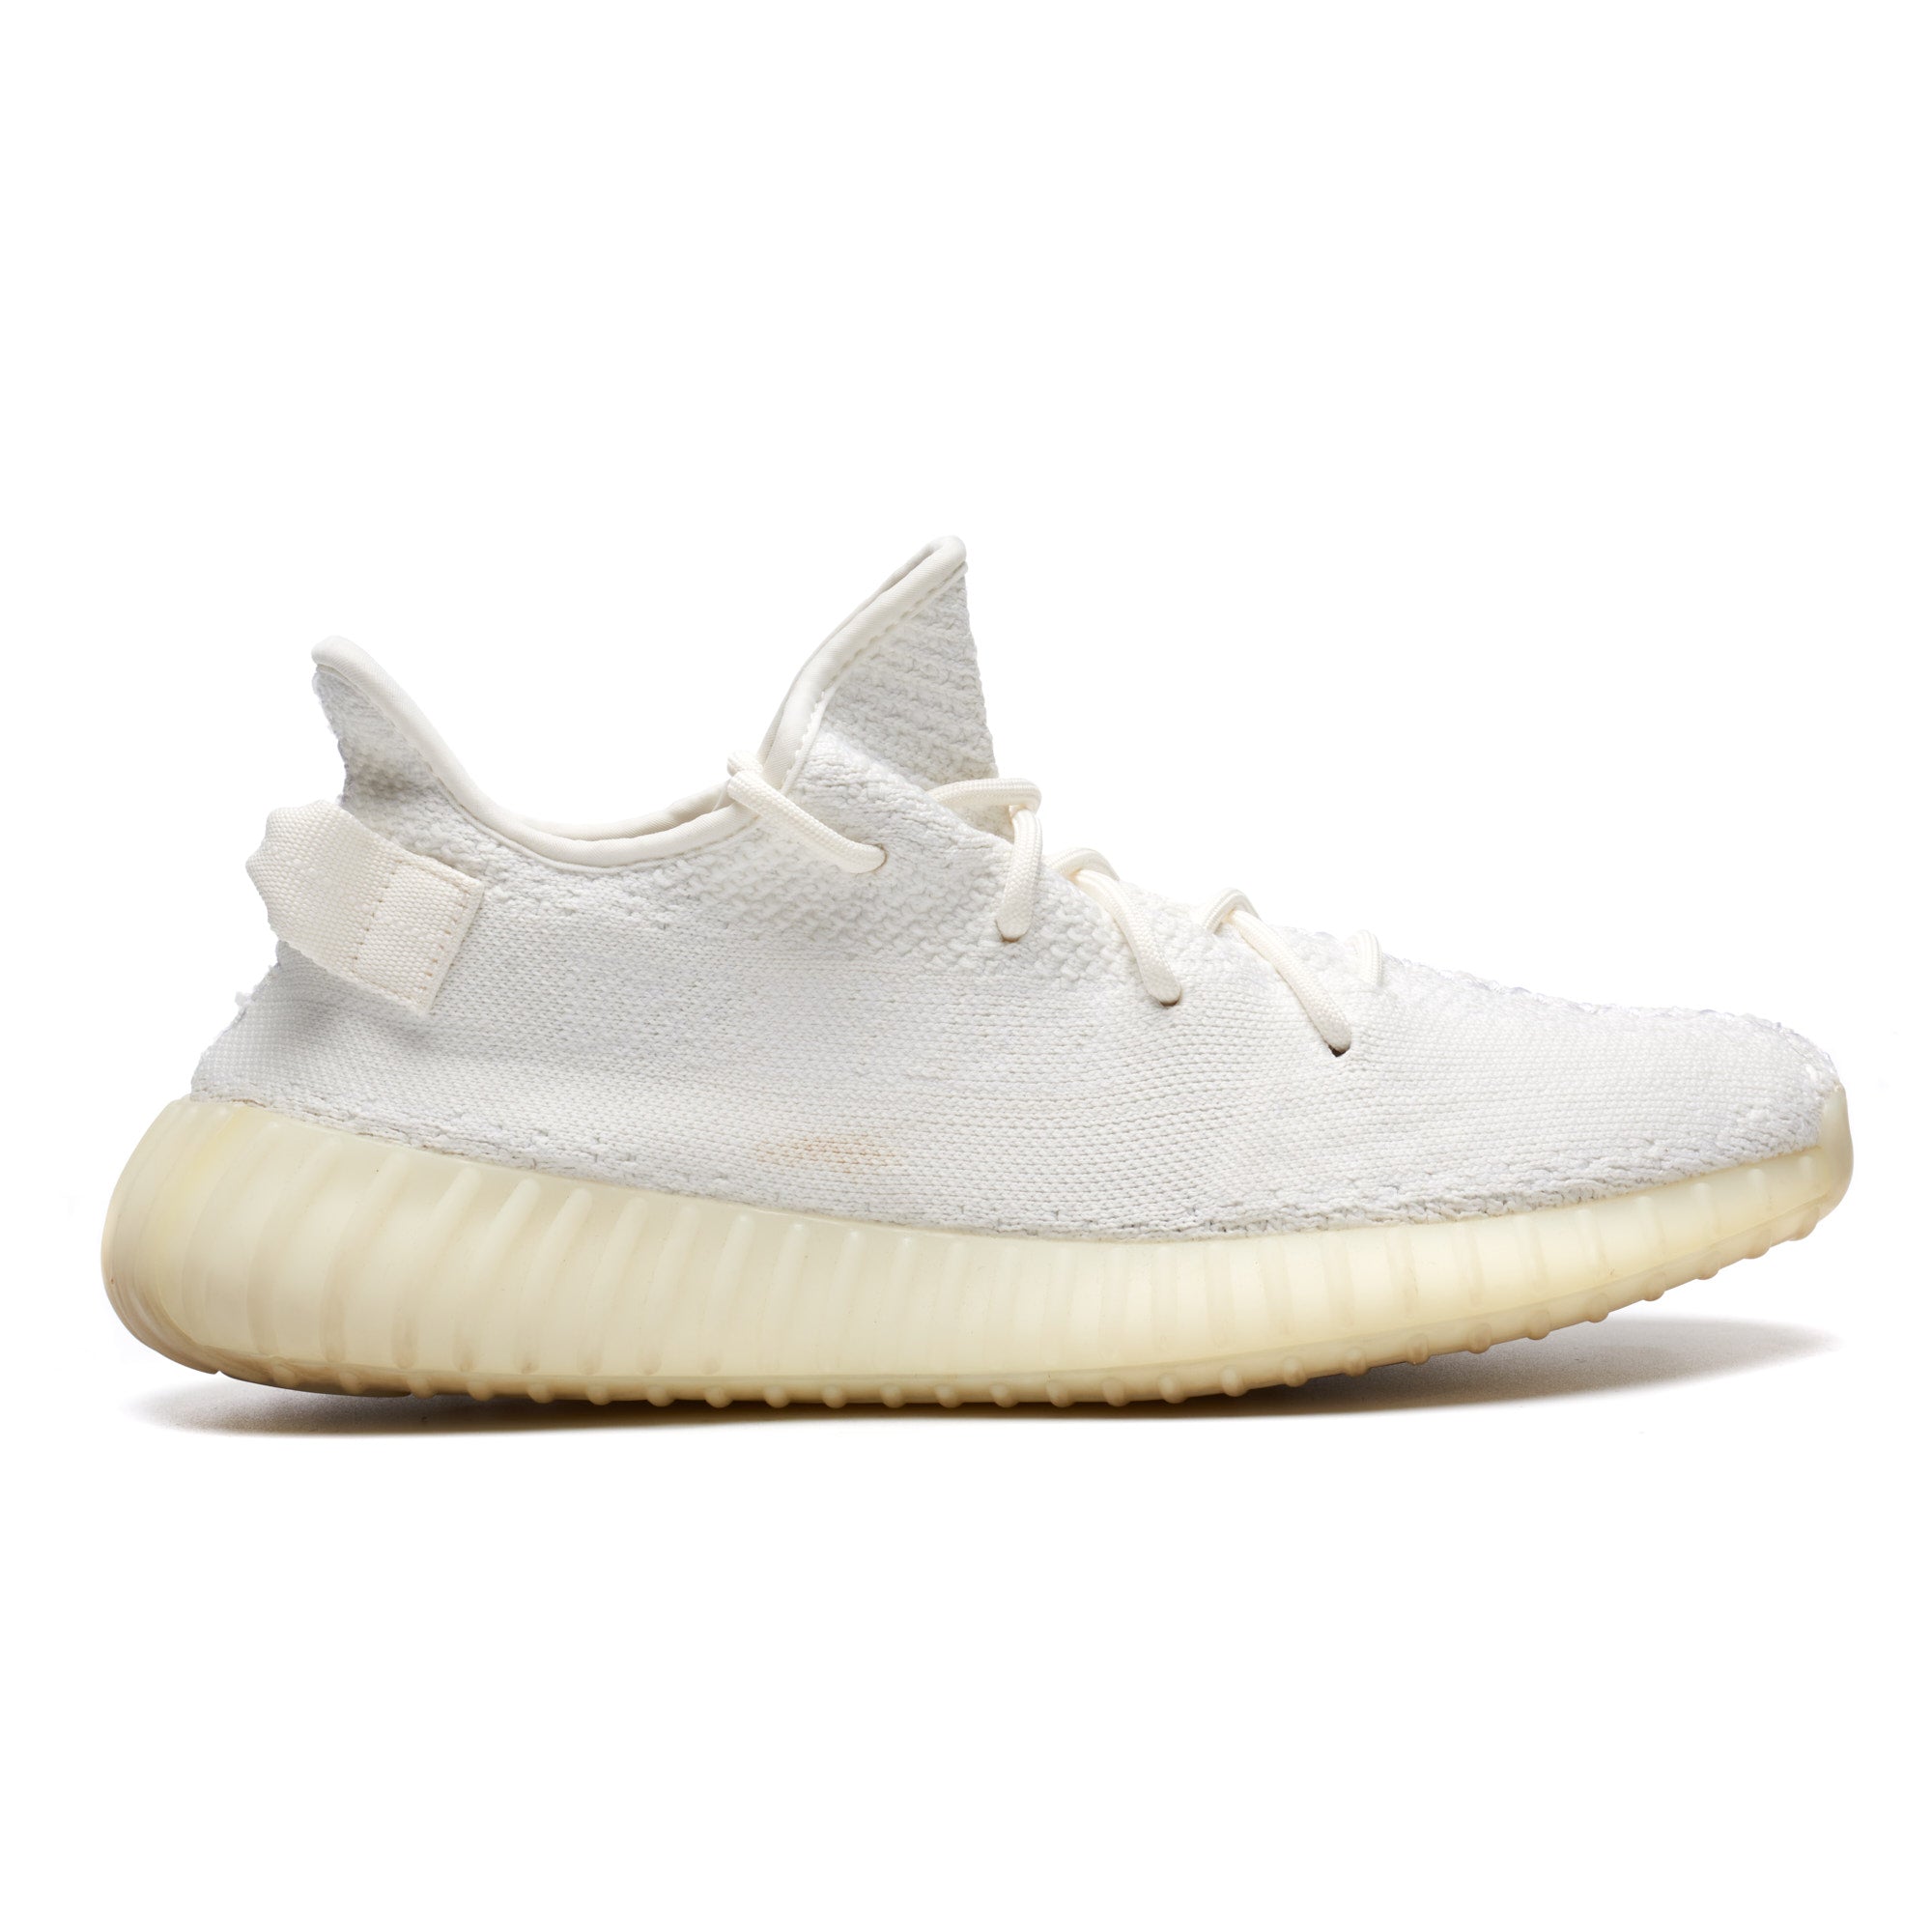 ADIDAS YEEZY BOOST 350 V2 Cream Triple White Sneakers Shoes UK 9.5 US 10 ADIDAS